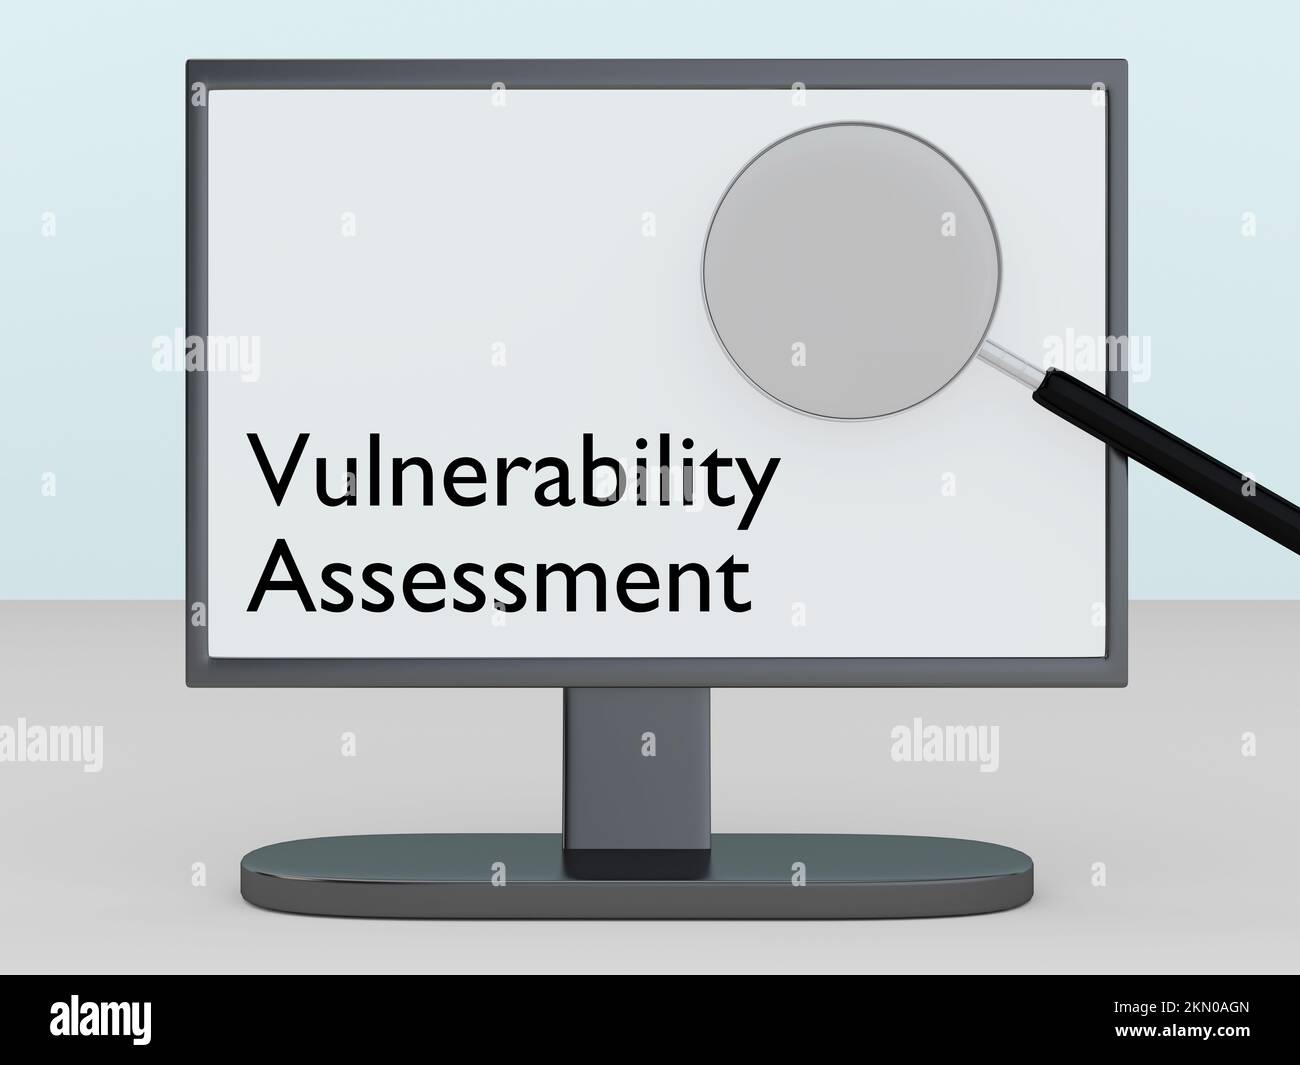 3D illustration of Vulnerability Assessment script on a PC screen, along with symbolic magnifying glass. Stock Photo